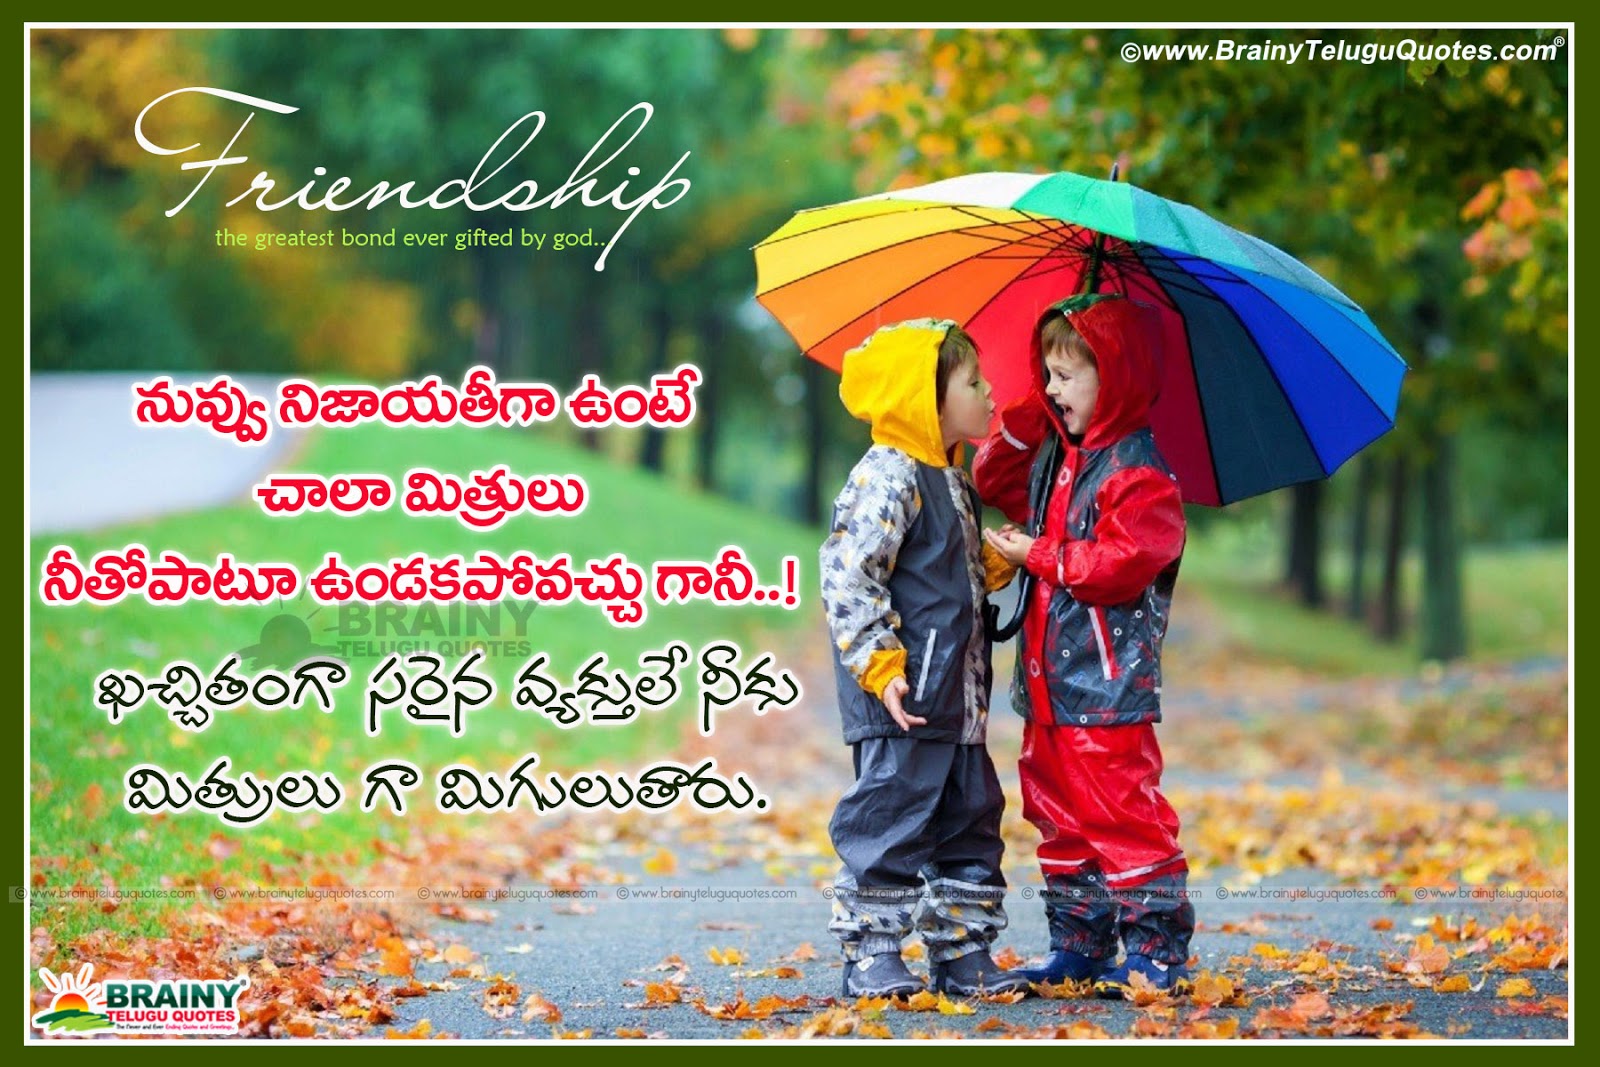 Latest Beautiful Telugu Nice Friendship Quotes sms messages with cute